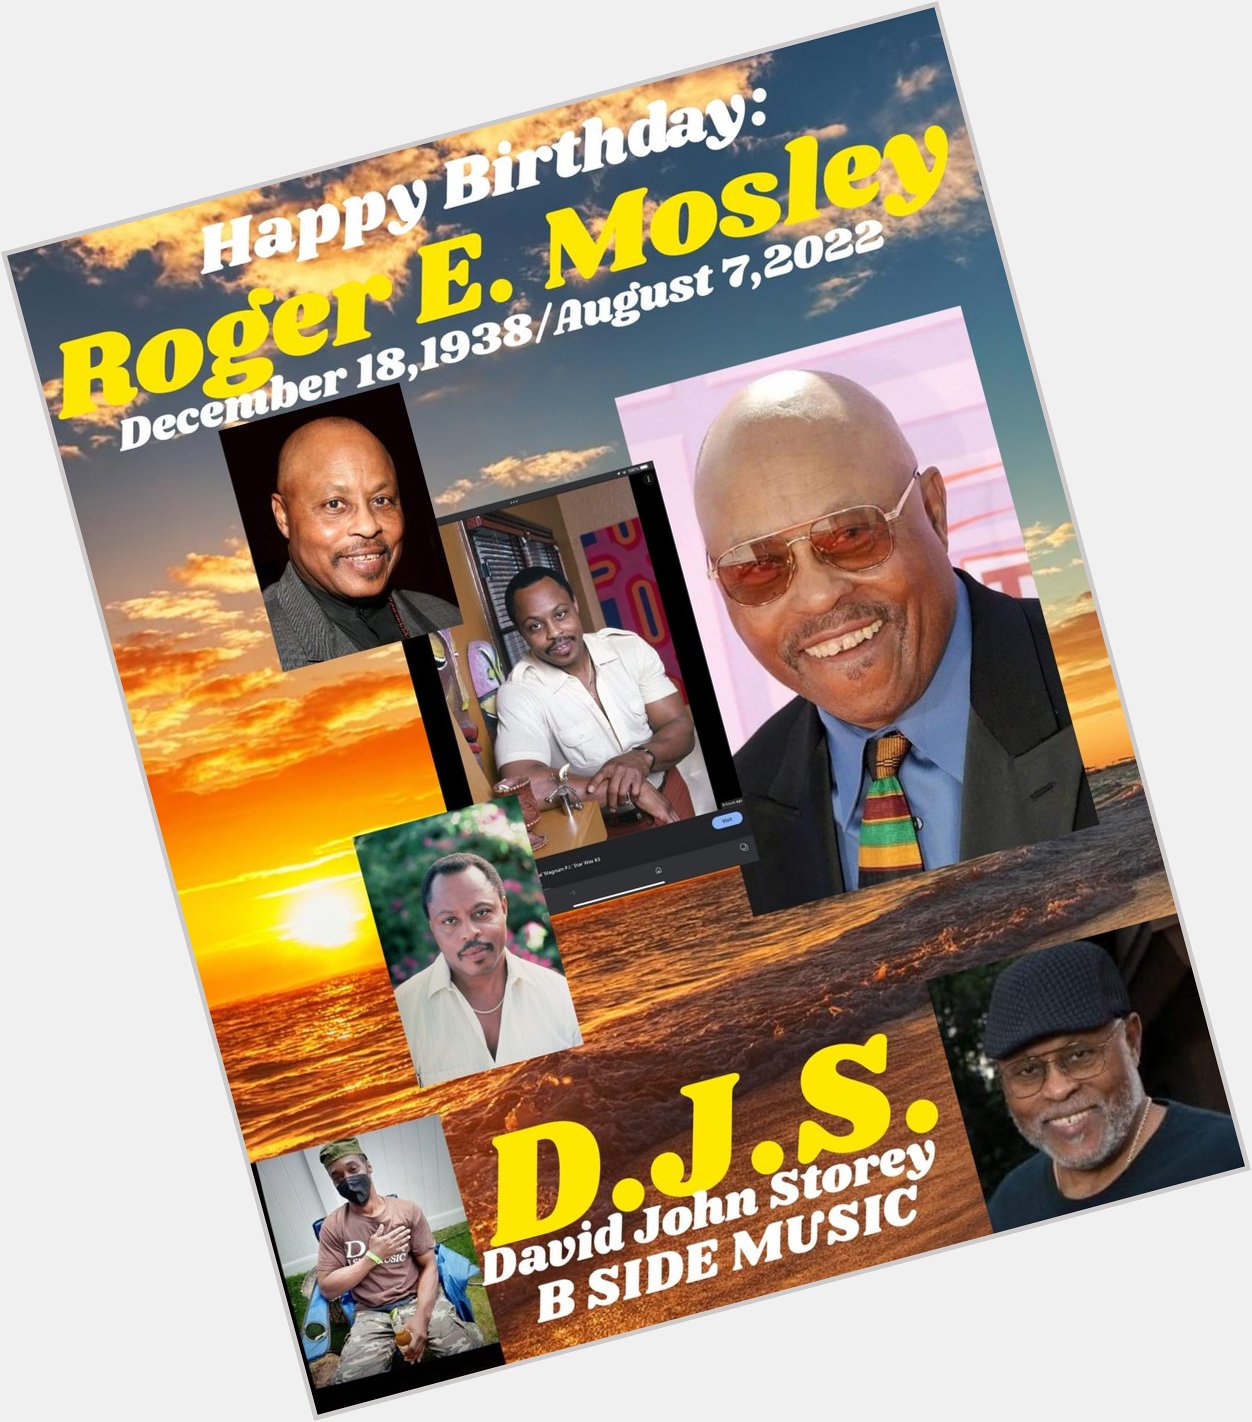 I(D.J.S.)\"B SIDE\" taking time to say Happy Heavenly Birthday to Actor: \"ROGER E. MOSLEY\". 